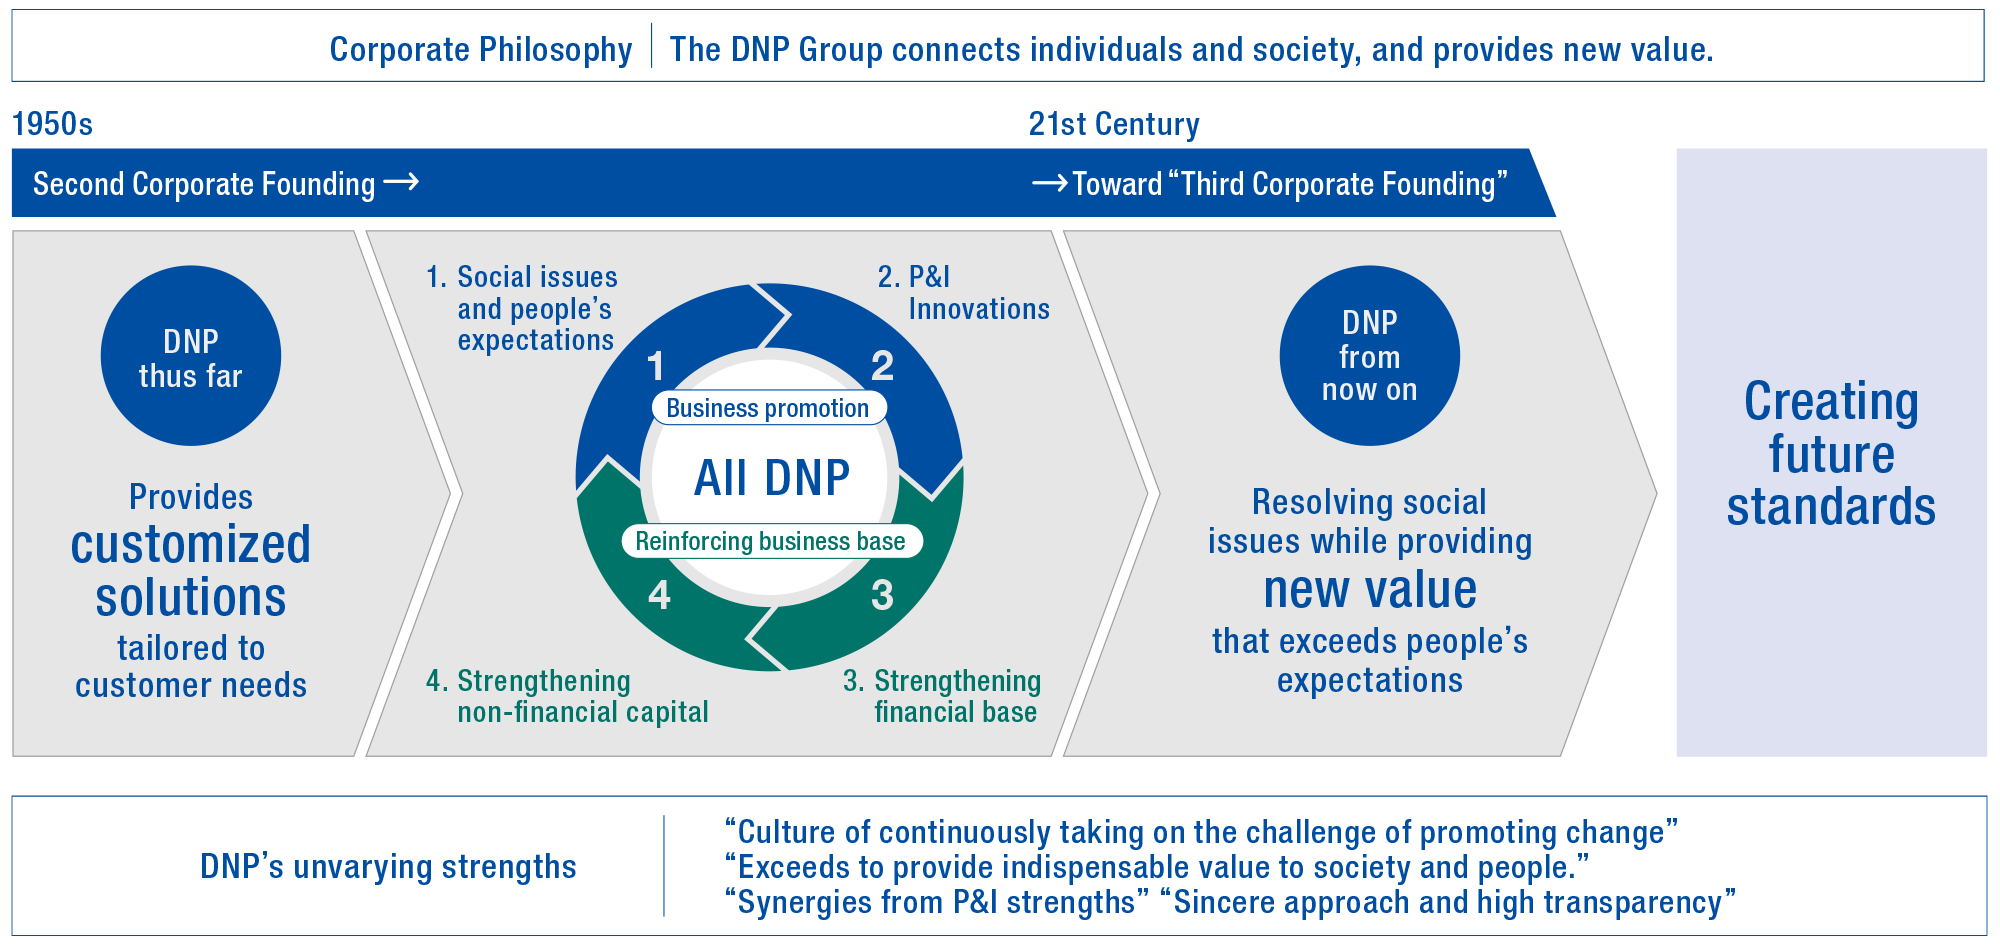 “The DNP Group connects individuals and society, and provides new value.” This is our corporate philosophy and our aim is to provide new value with the total strengths of All DNP to realize its Third Corporate Founding.